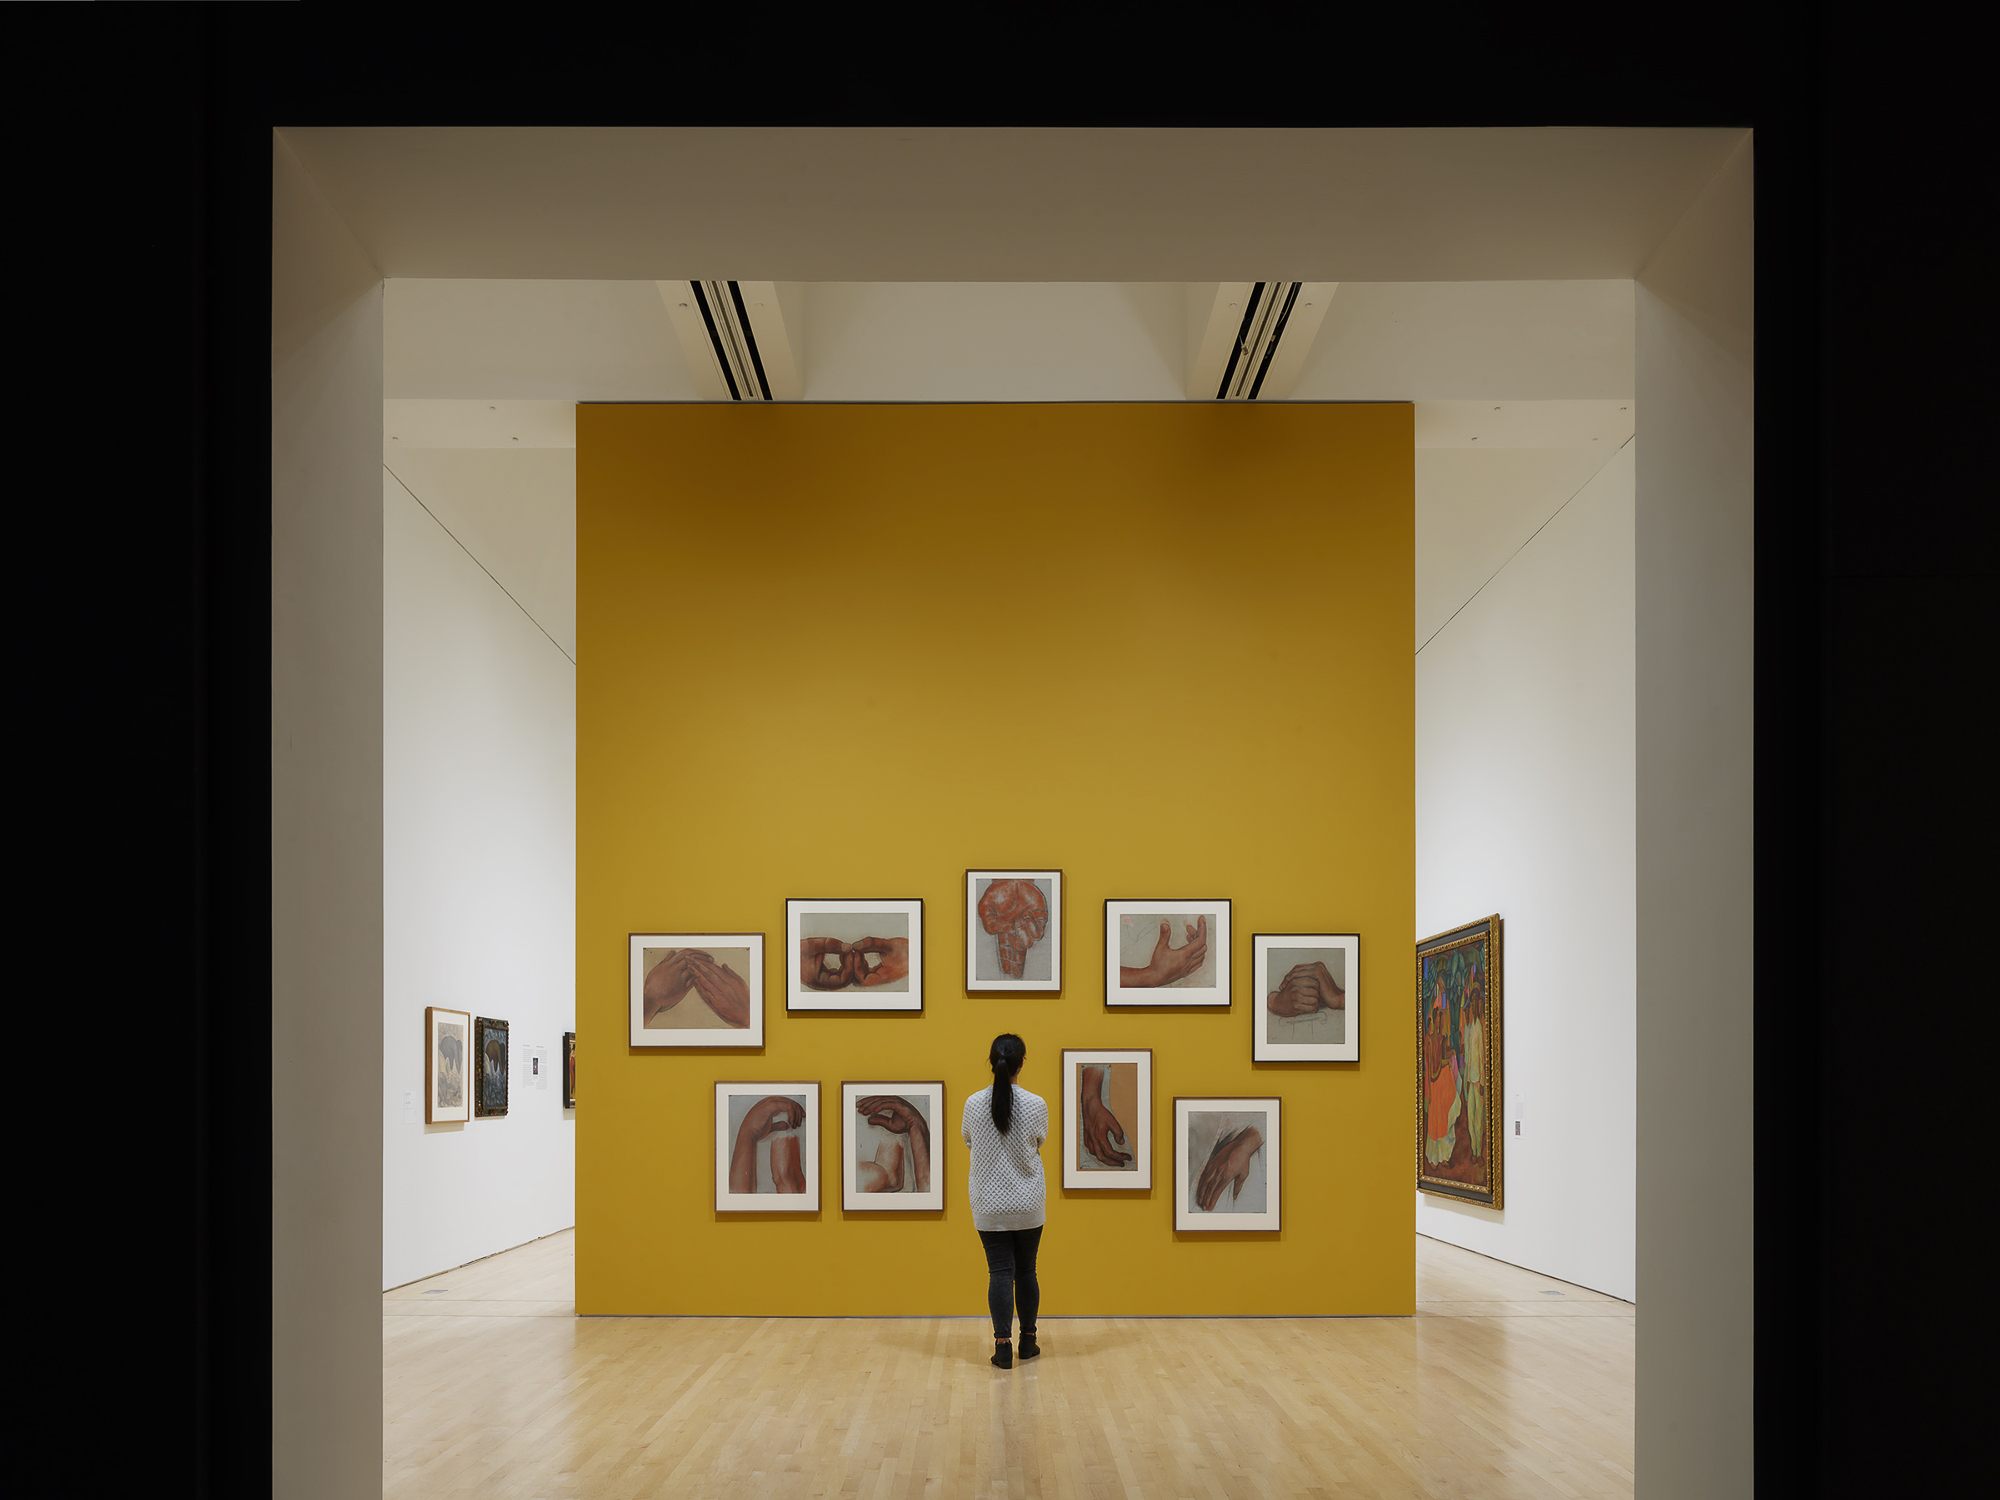 A museum visitor looks at a wall of artworks by Diego Rivera in the exhibition 